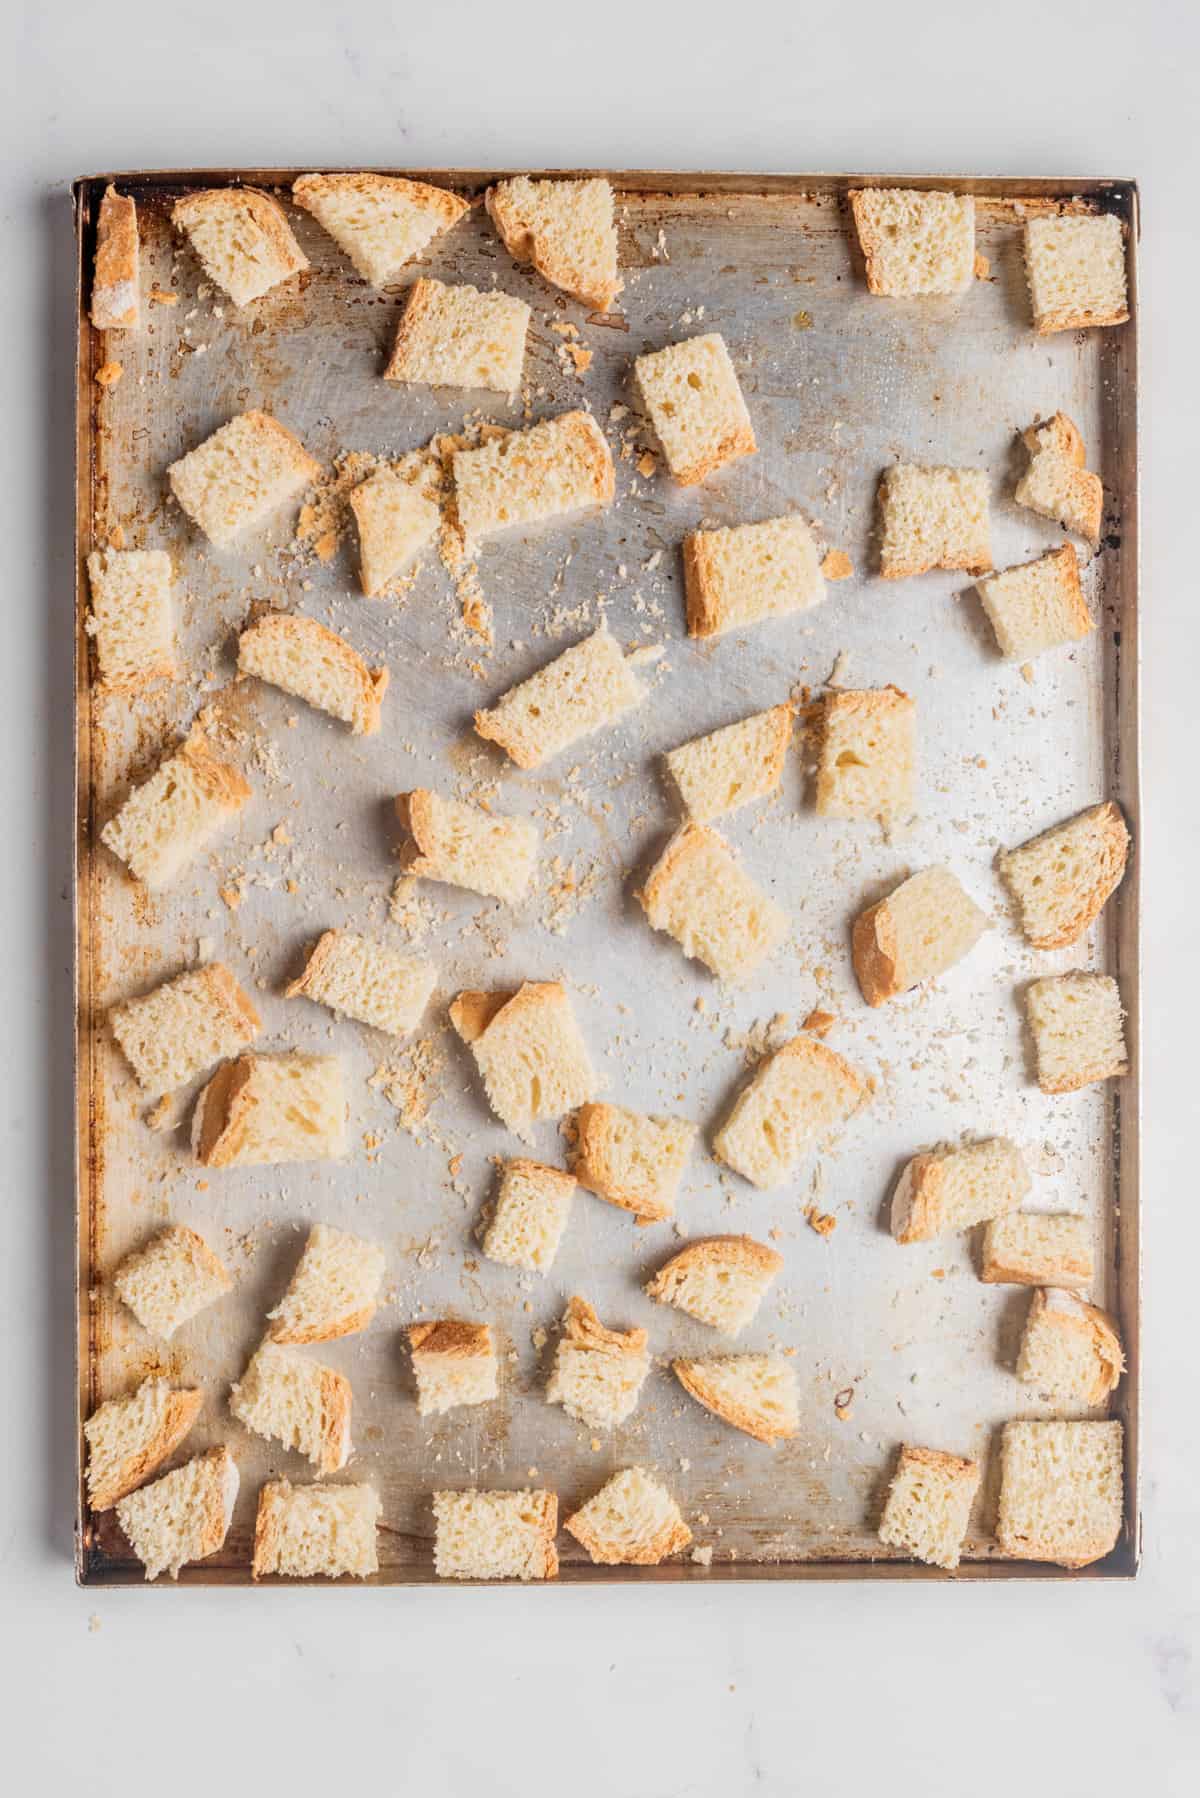 An overhead image of cubed crusty bread spread out on a baking sheet.